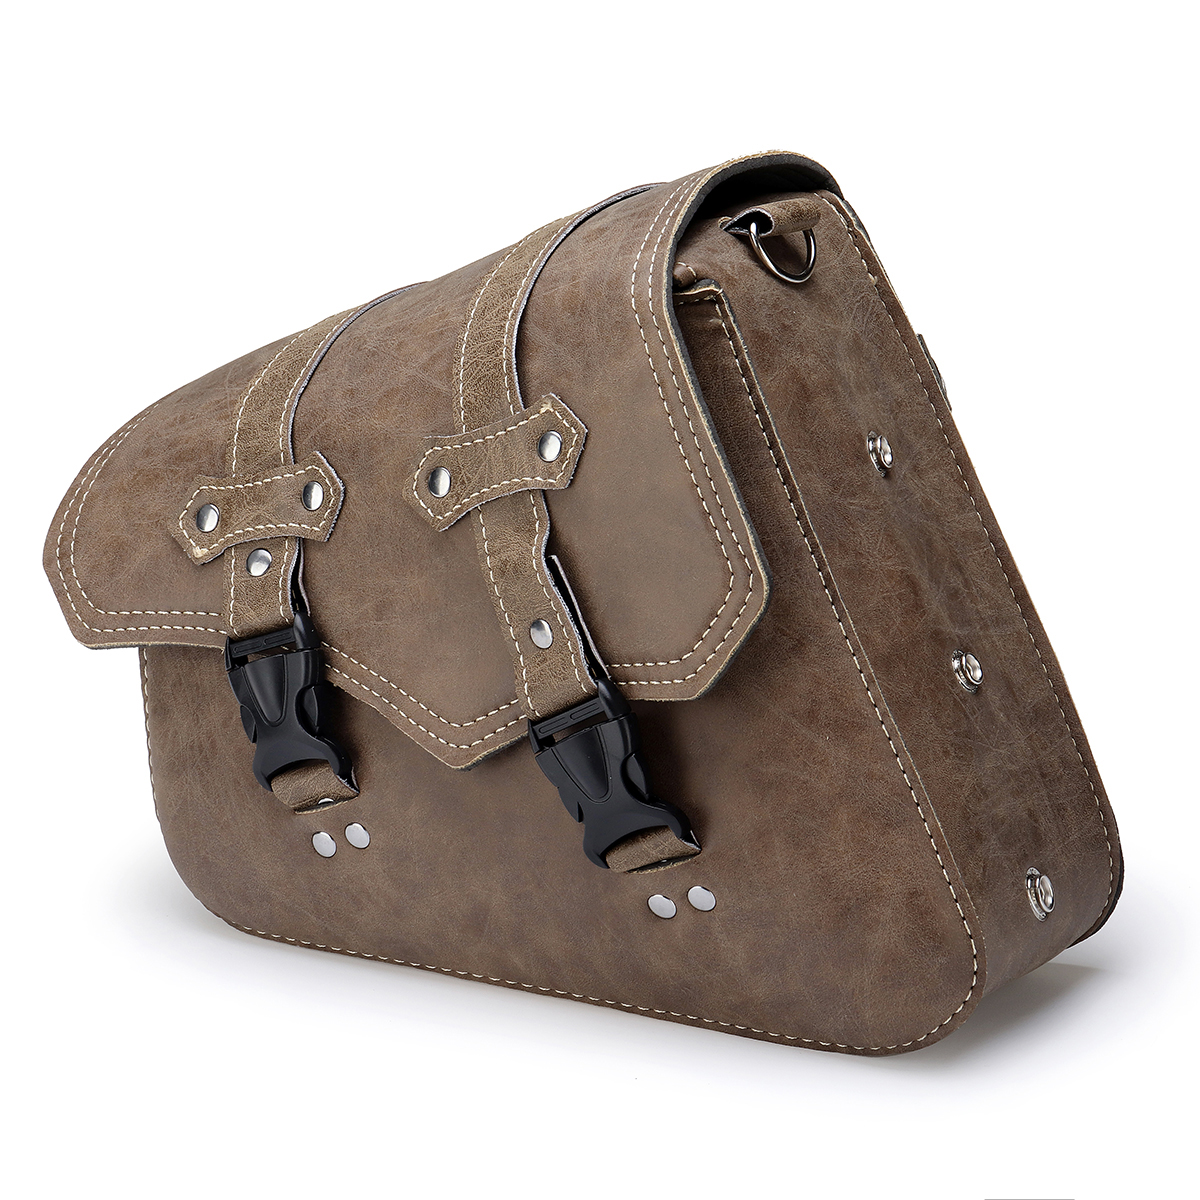 Left-Right-Side-Universal-Motorcycle-Saddlebag-Tool-Storage-Waterproof-PU-Leather-Panniers-Bag-with--1863605-6